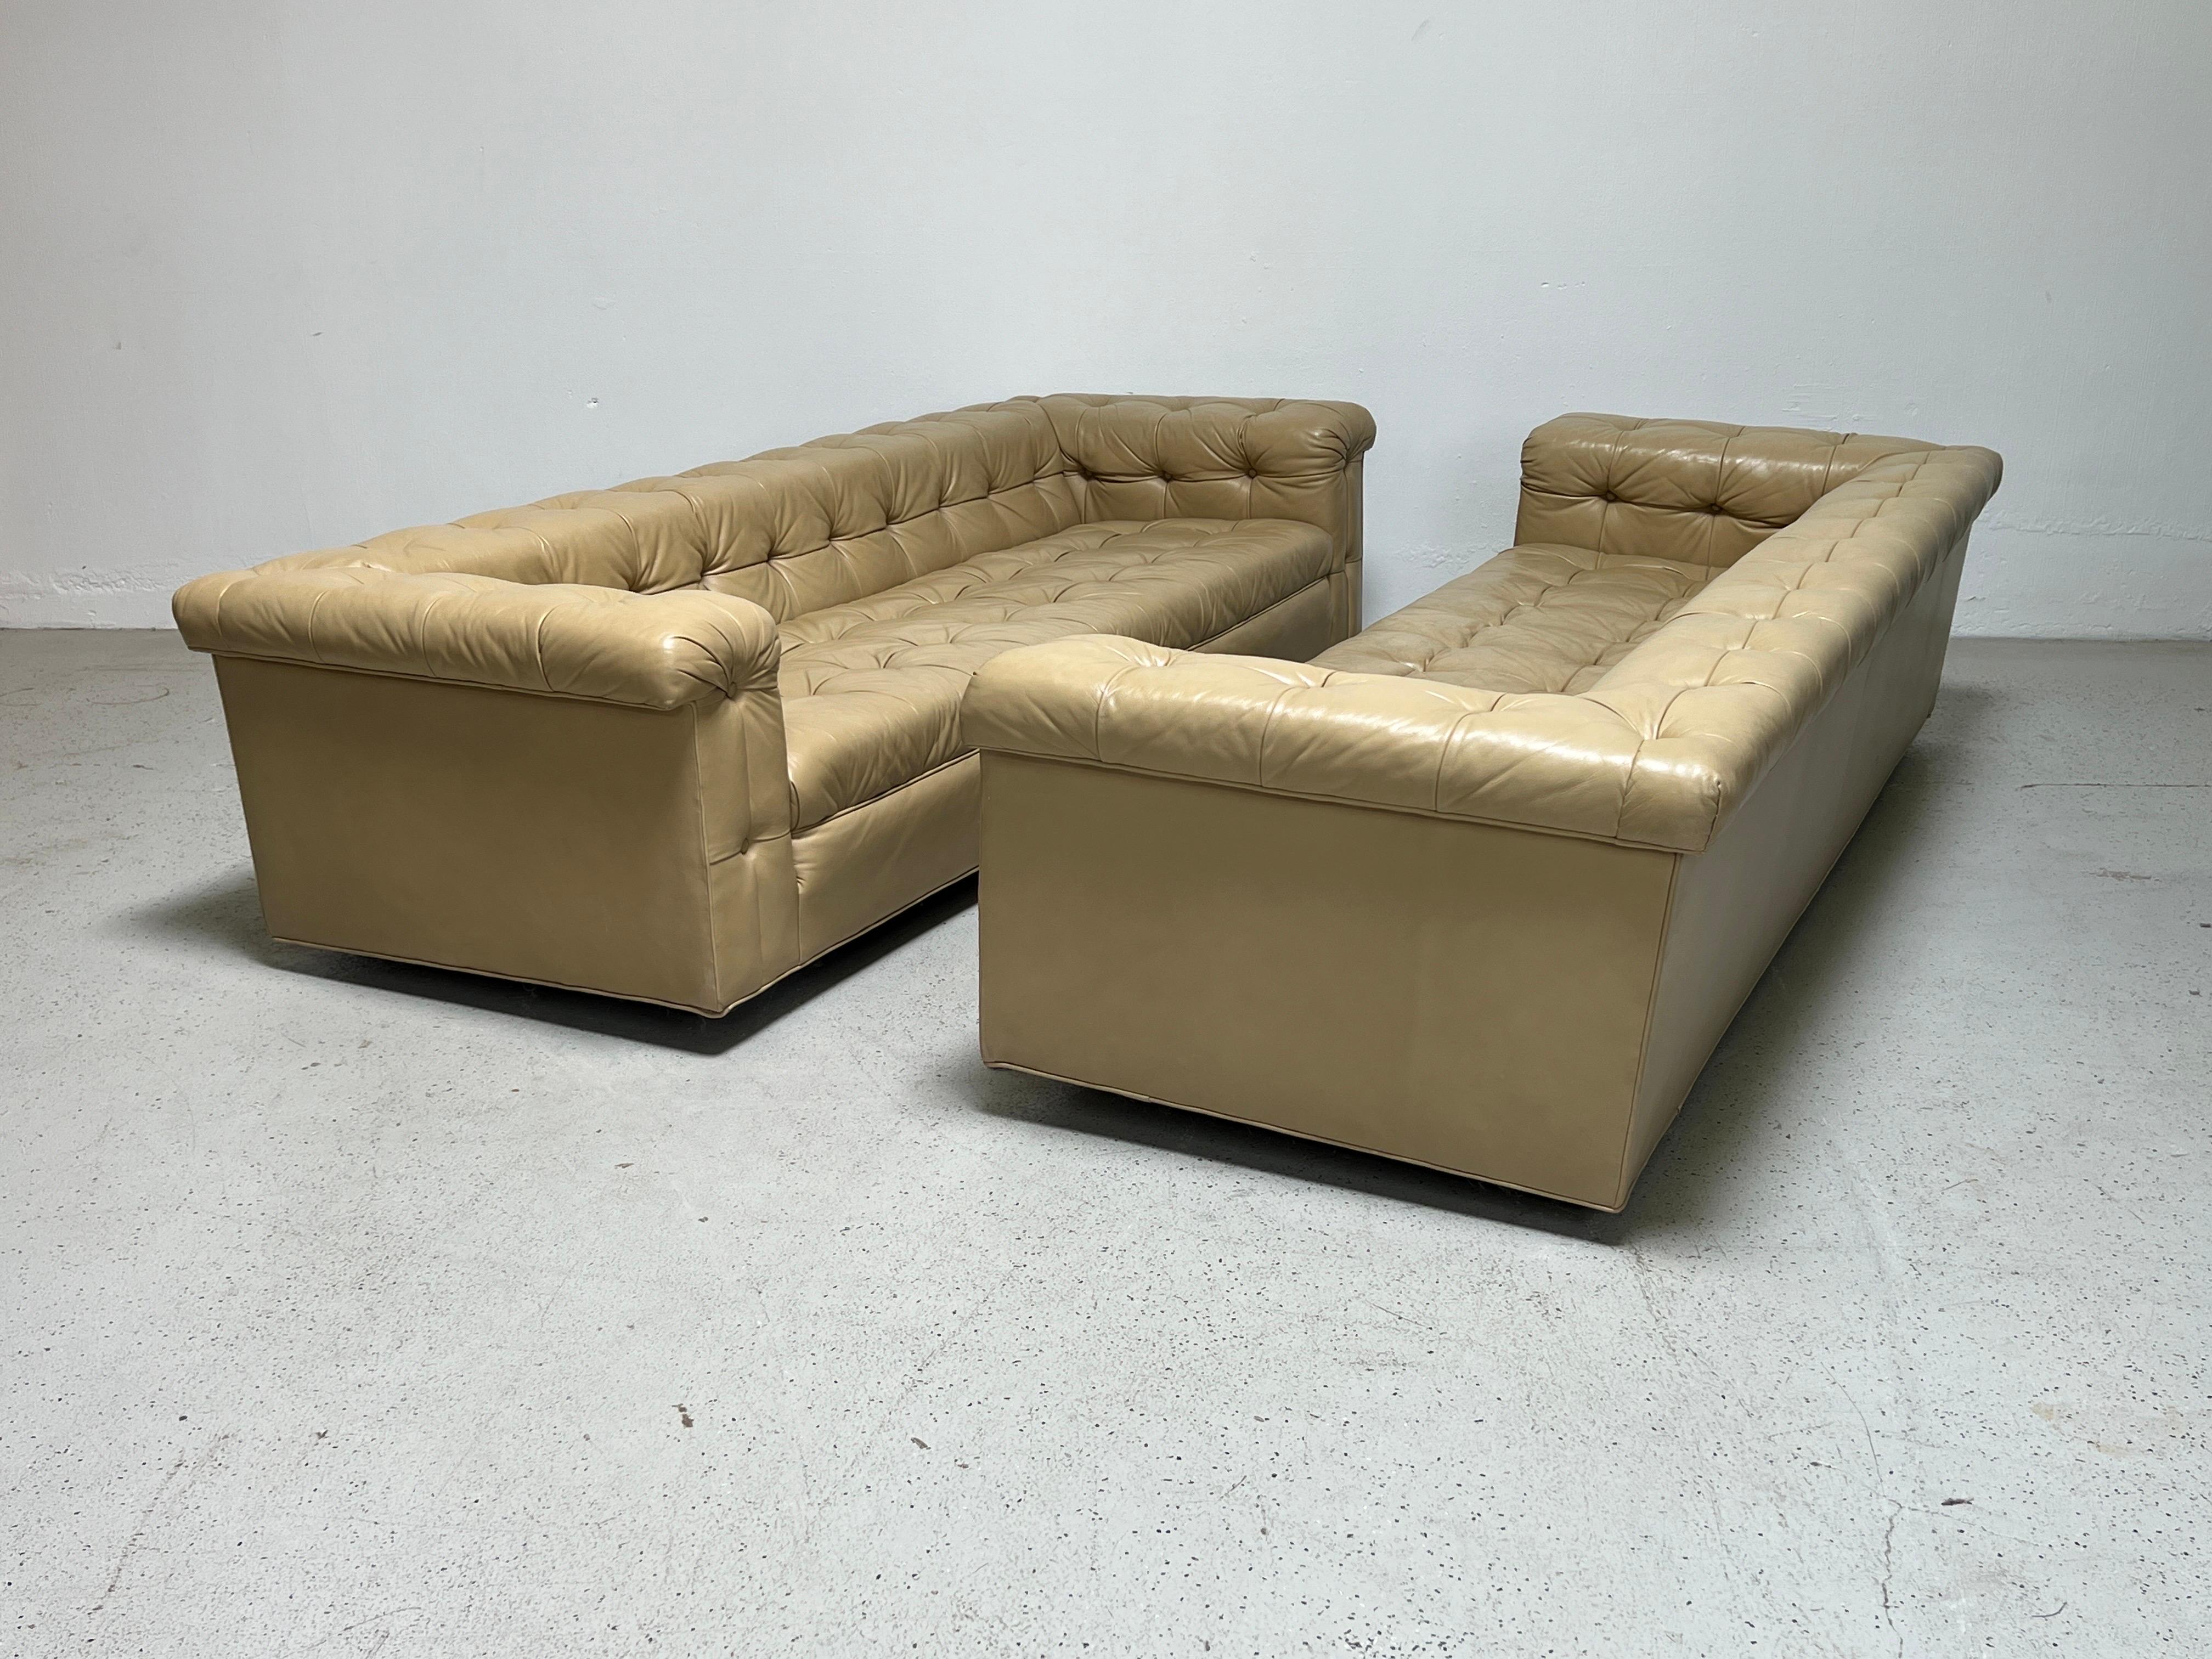 Pair of Party Sofas by Edward Wormley for Dunbar in Original Leather For Sale 10